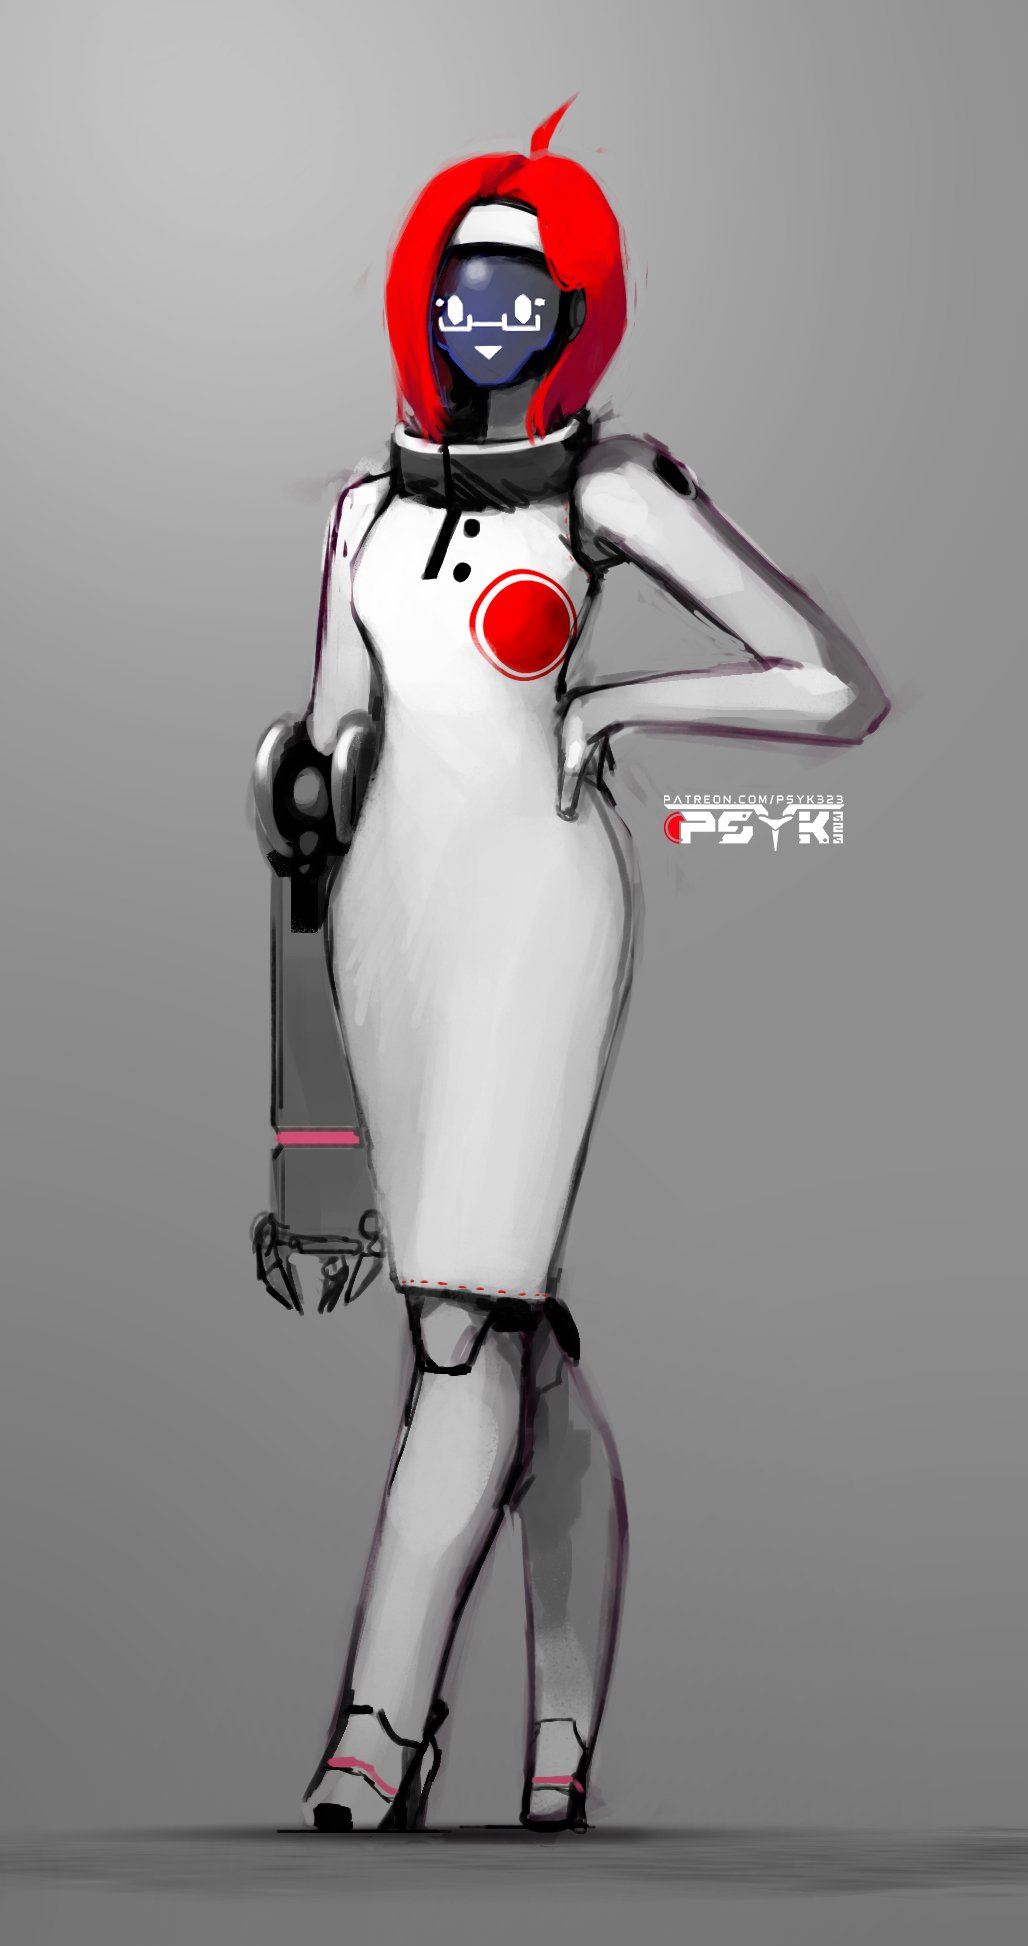 Absolut flyde Korrespondance Psyk323 on Twitter: "My Fiona all mature and business like. They grow up so  fast 😊 #gynoid #android #robotgirl #robot #bot #scifi #future #ガイノイド #fiona  #F09 https://t.co/ZTcXxl7tkj" / Twitter